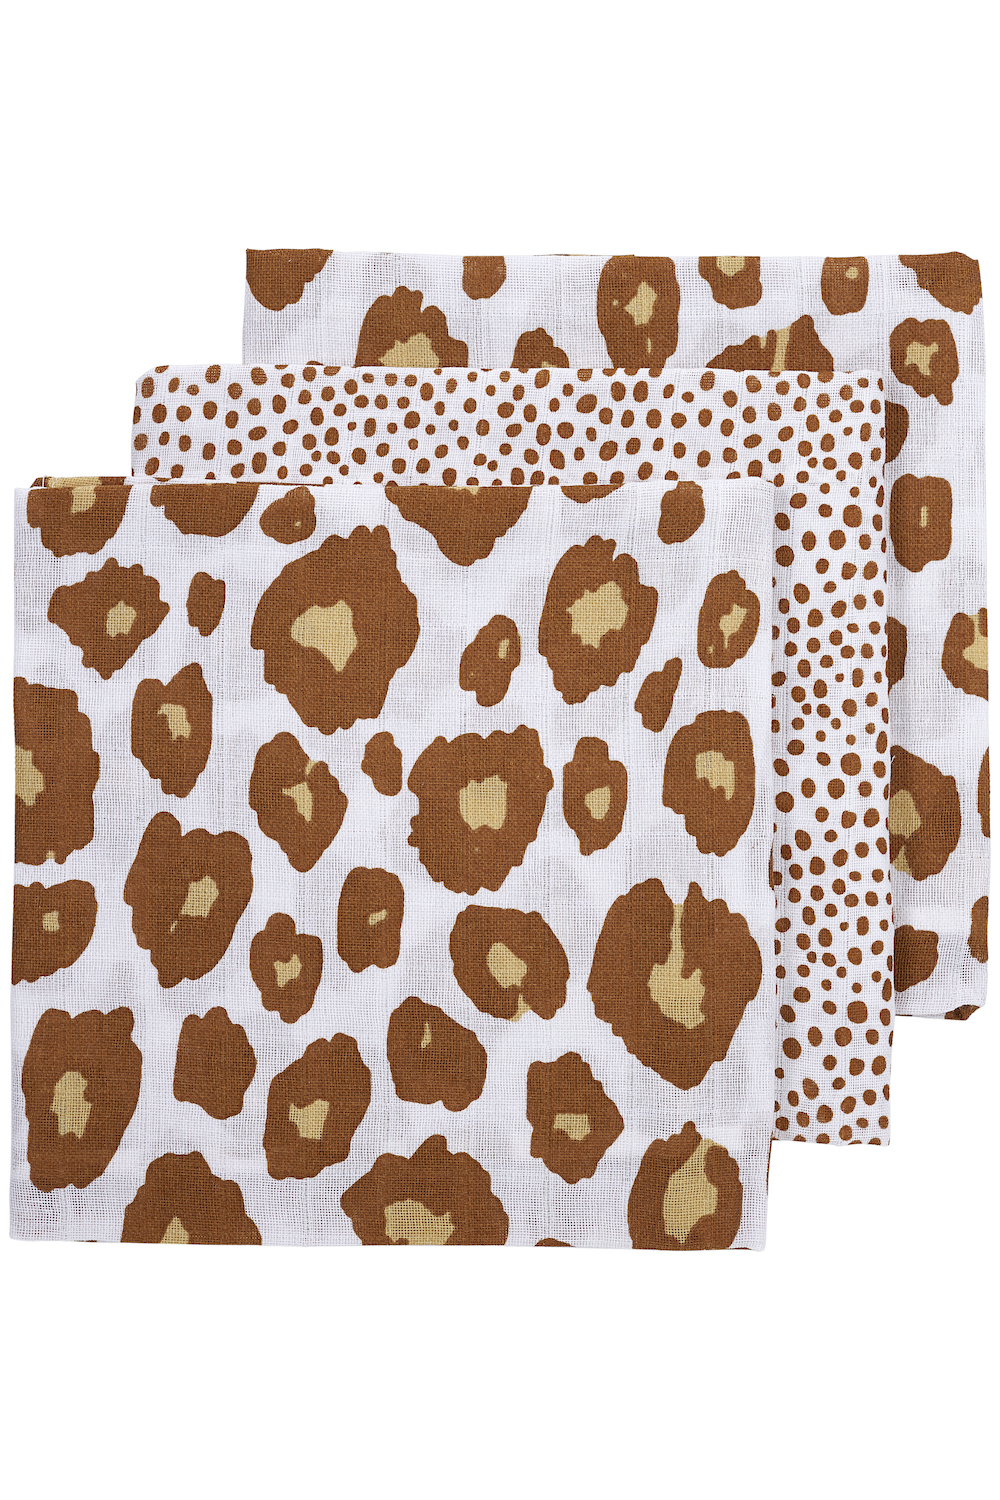 Square 3-pack Cheetah/Panther - camel - 70x70cm